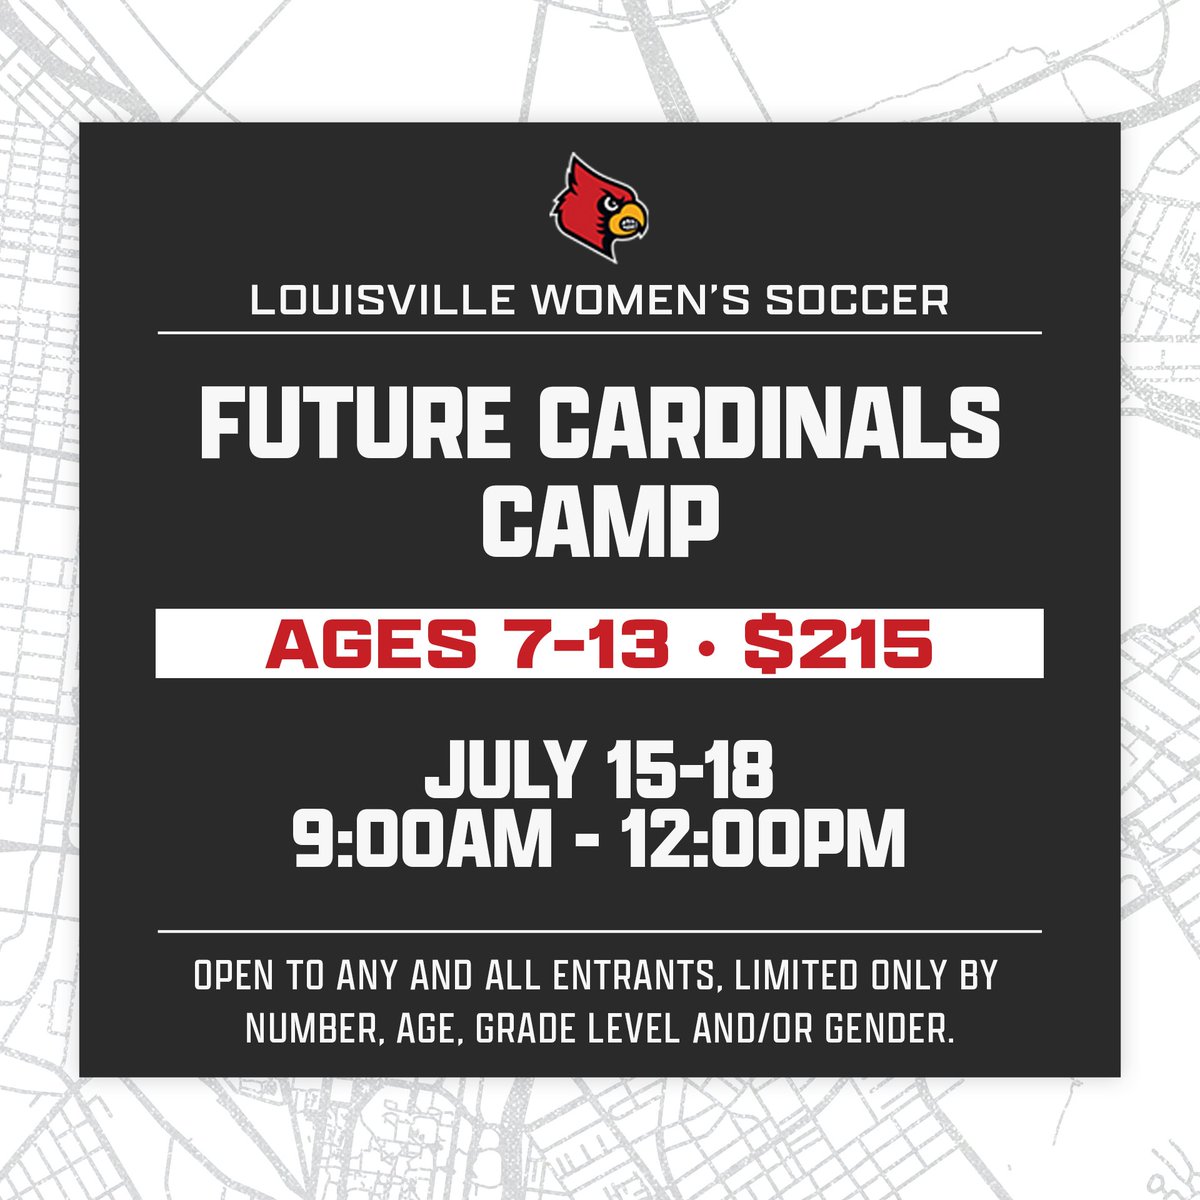 It is the perfect time to sign up for one of our camps‼️ Check out all our options and sign up at the link below ⬇️ 🔗 uofl.me/4436VxT #GoCards #GoCards